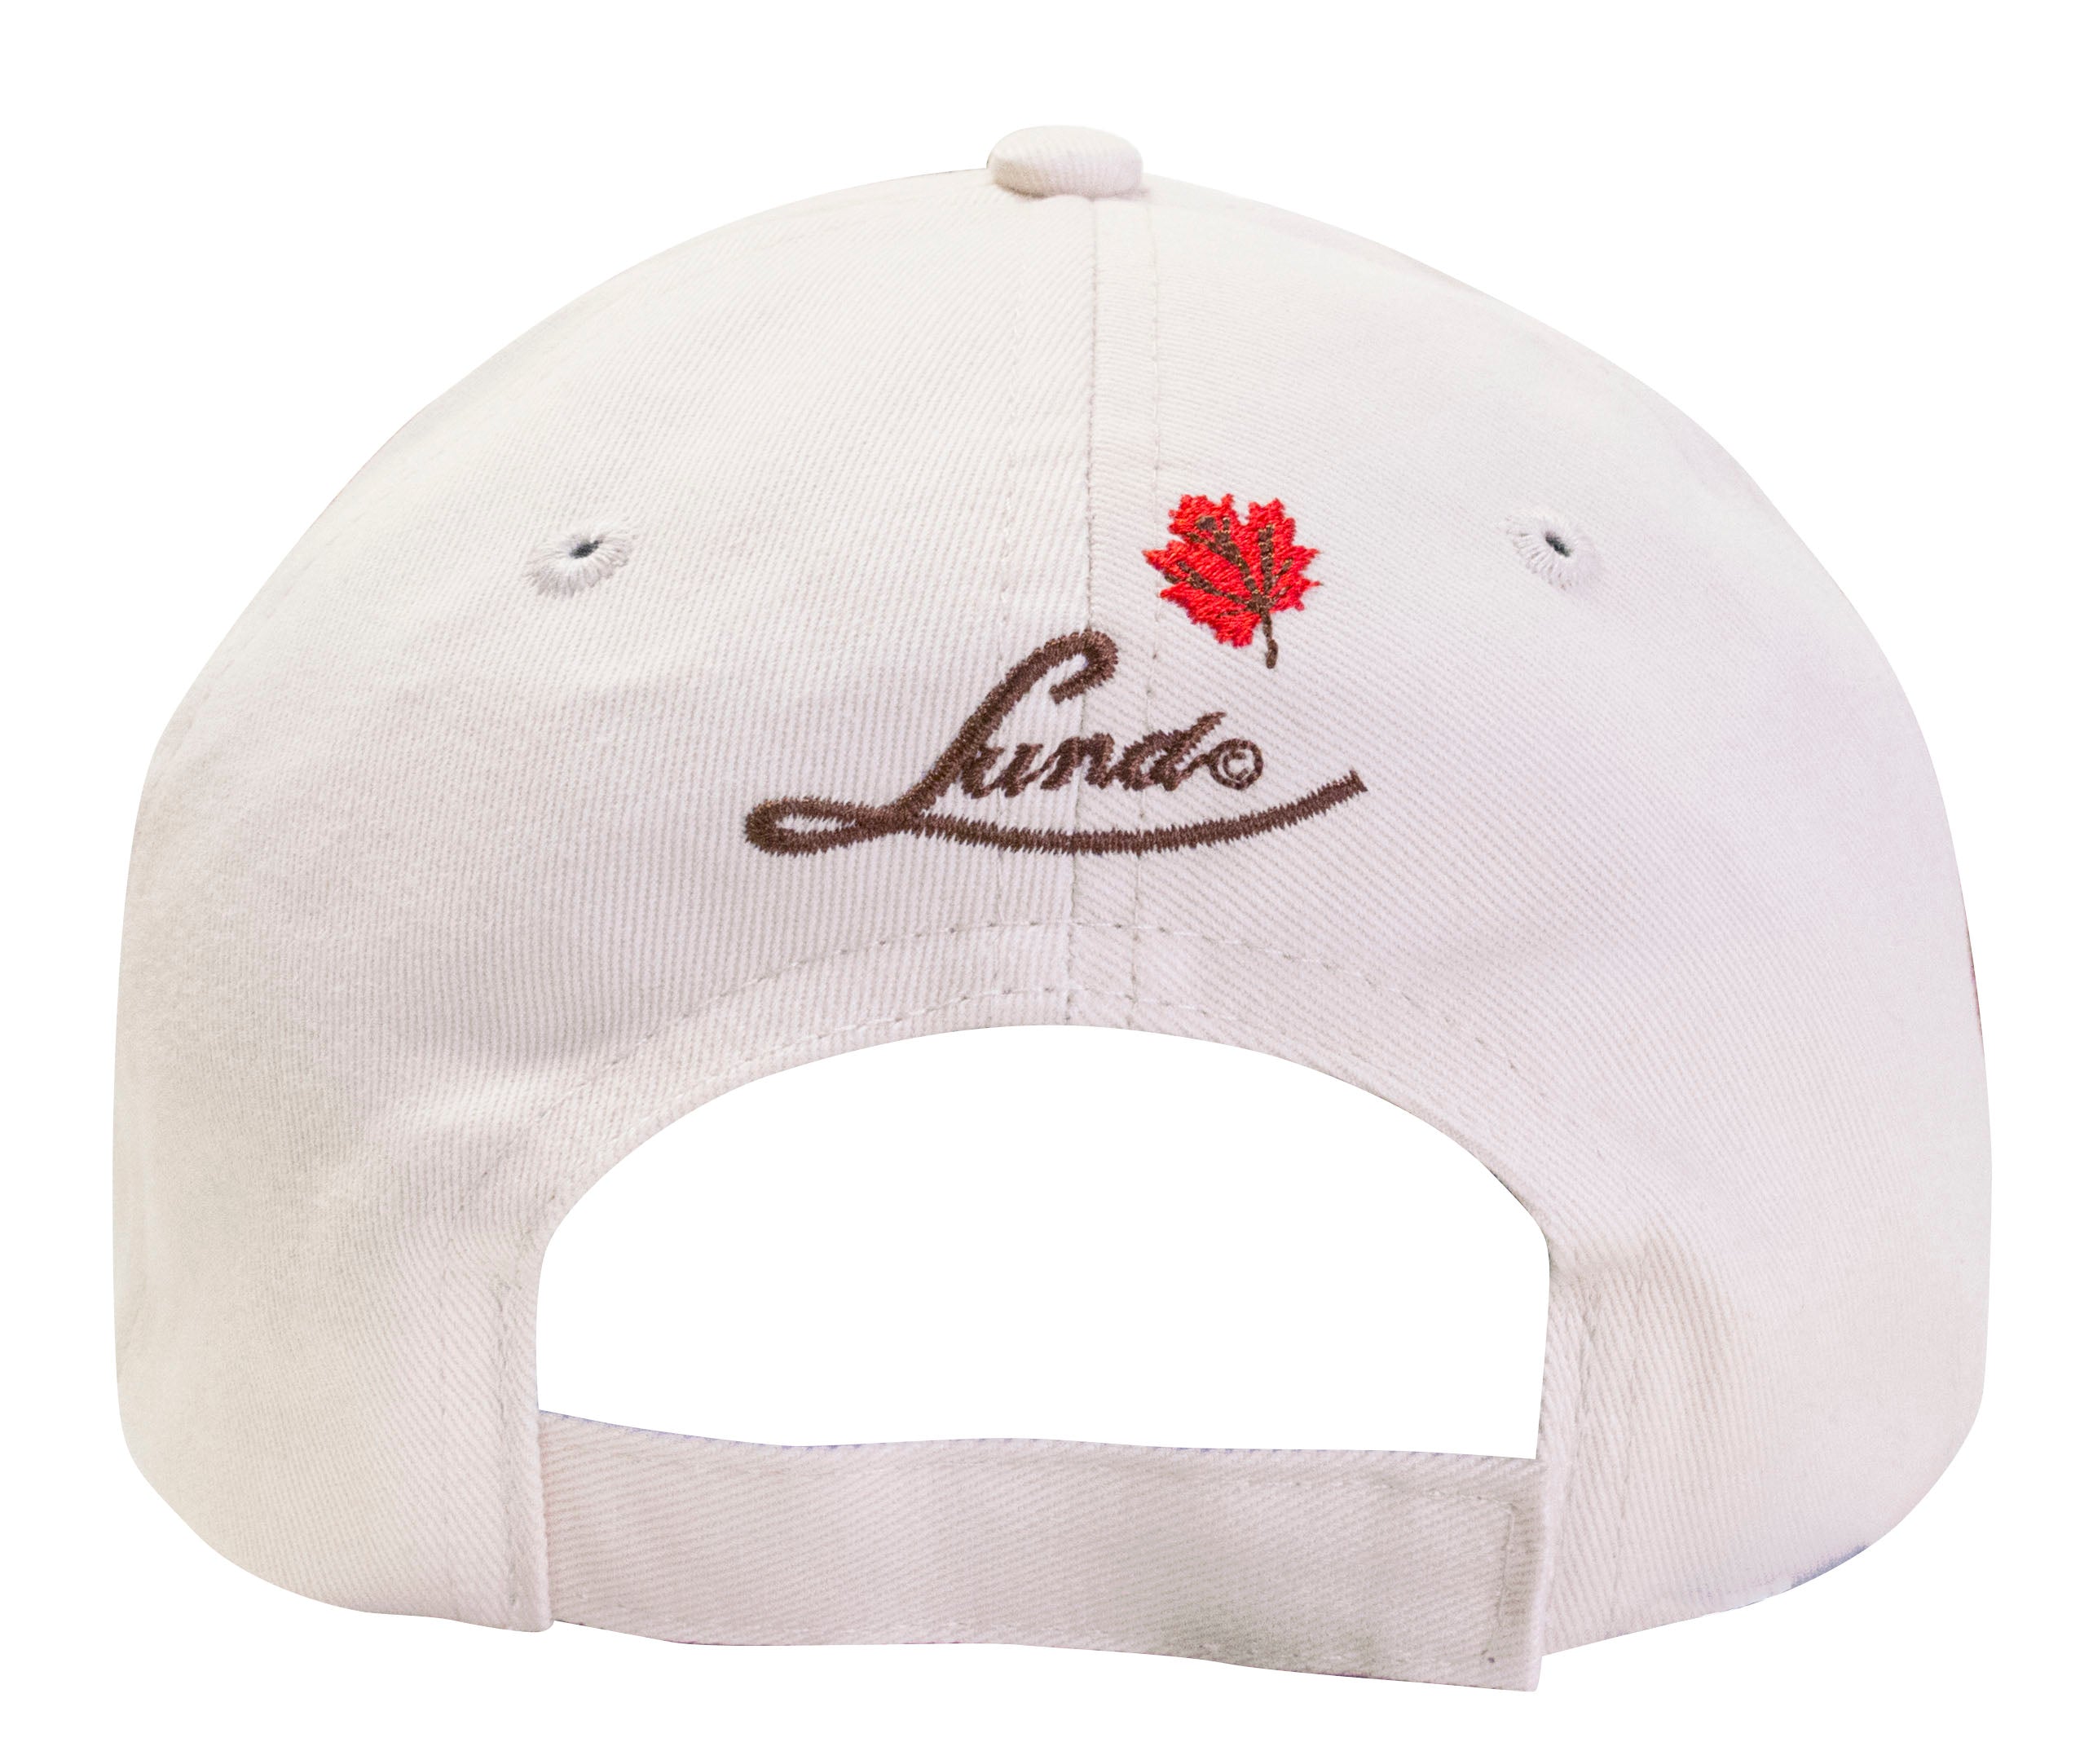 Ruth Lund Cluster Leaves Embroidered Baseball Cap